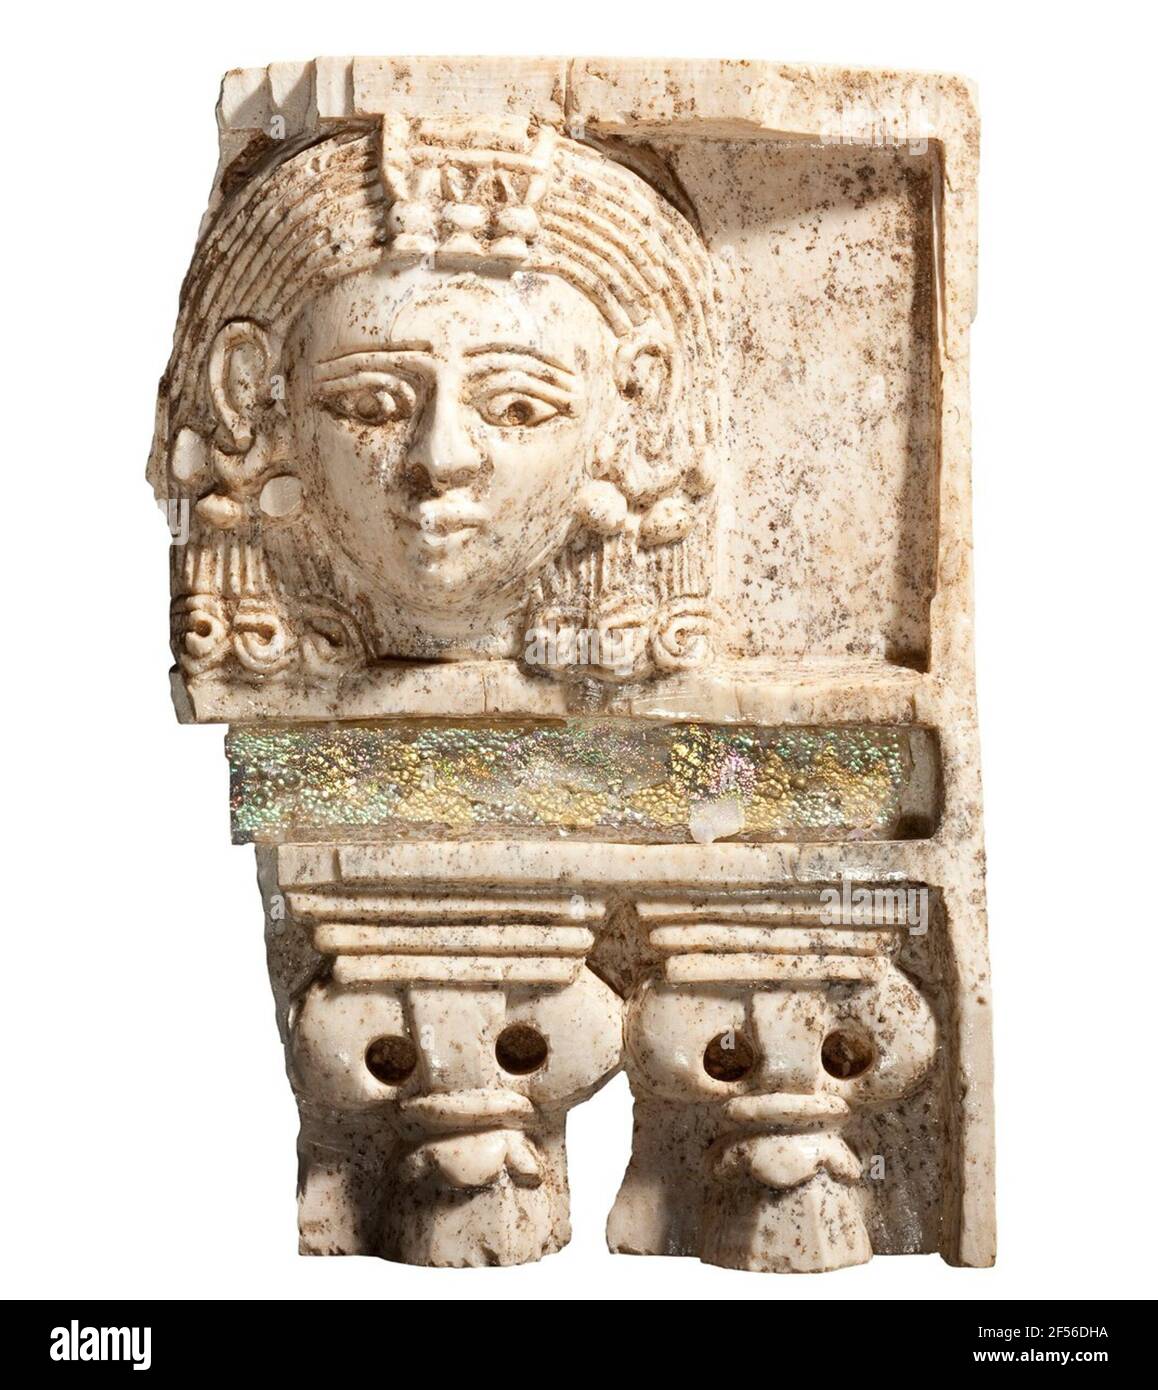 Furniture fitting 'Woman in the window'. A Women's Head of Egyptian Fashion, equipped with rich head and earmle jewelry, looks down from a rectangular window above a column balustrade. The hair, falling behind the ears on both sides, ends in curls shortly under chin height. Over the forehead a piece of jewelry. Between the window and the column balustrade is a well-preserved rectangular glass insert, iridescent due to the ground storage. There are two columns capitals to see with wide-deposing volutes and leaf robbery on slim column shafts. The cover plate is staging. The relief is on the left Stock Photo